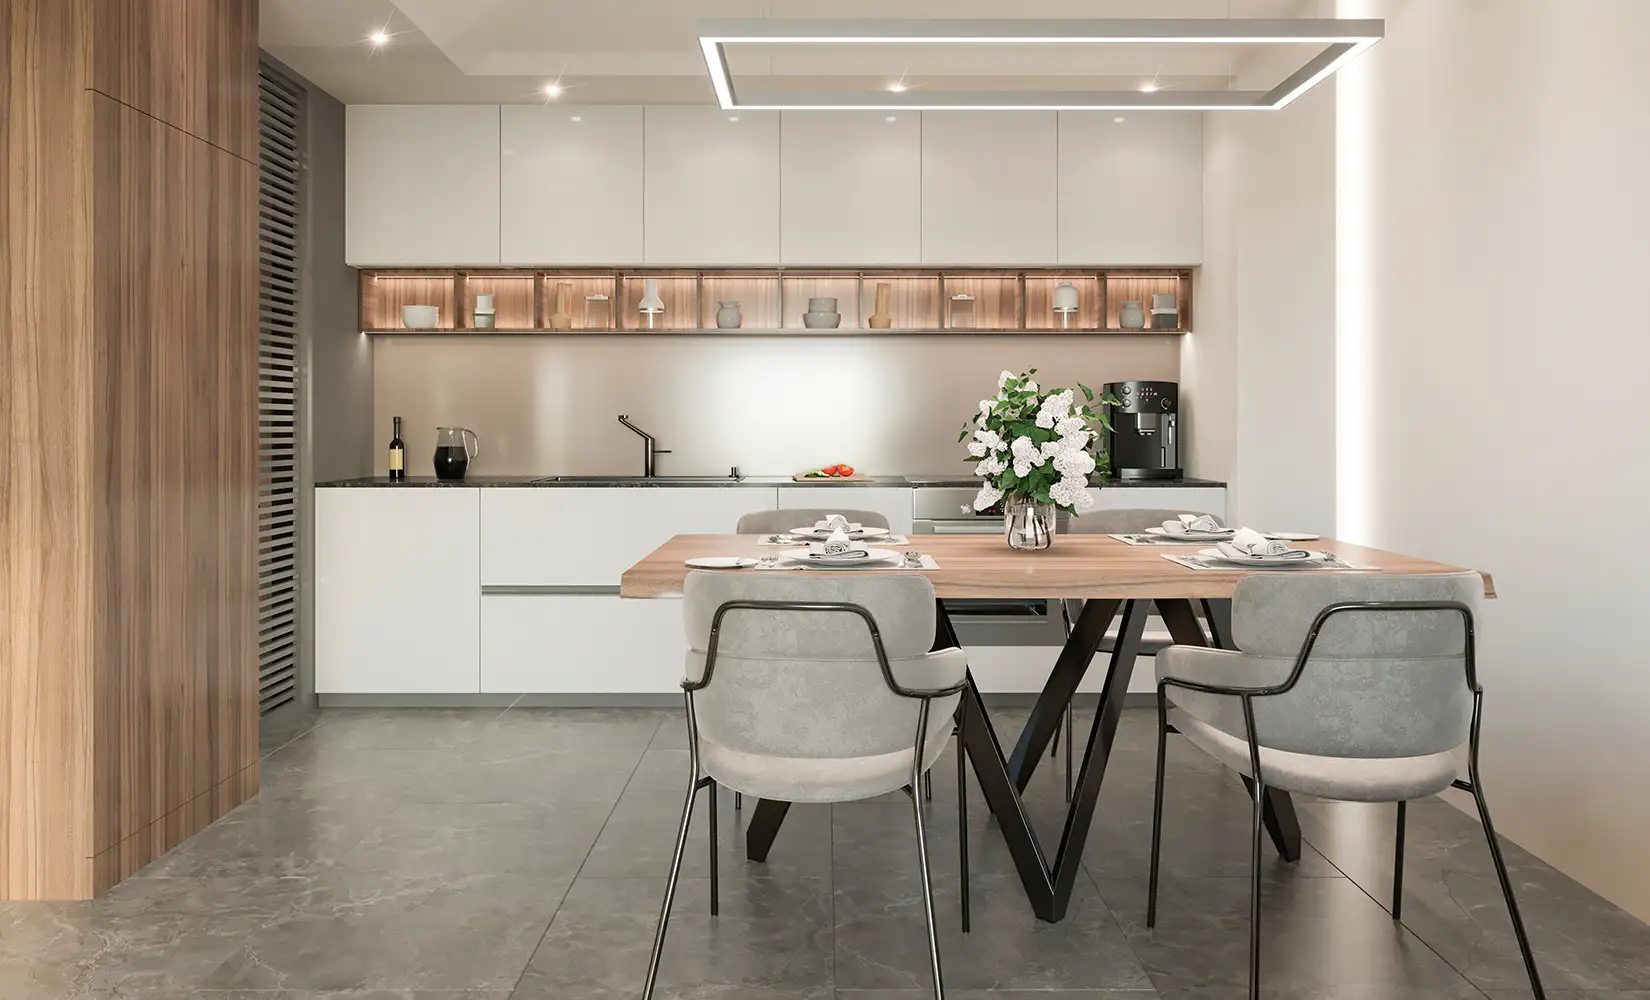 Modern kitchen with white cabinets concrete countertops, and concrete flooring.